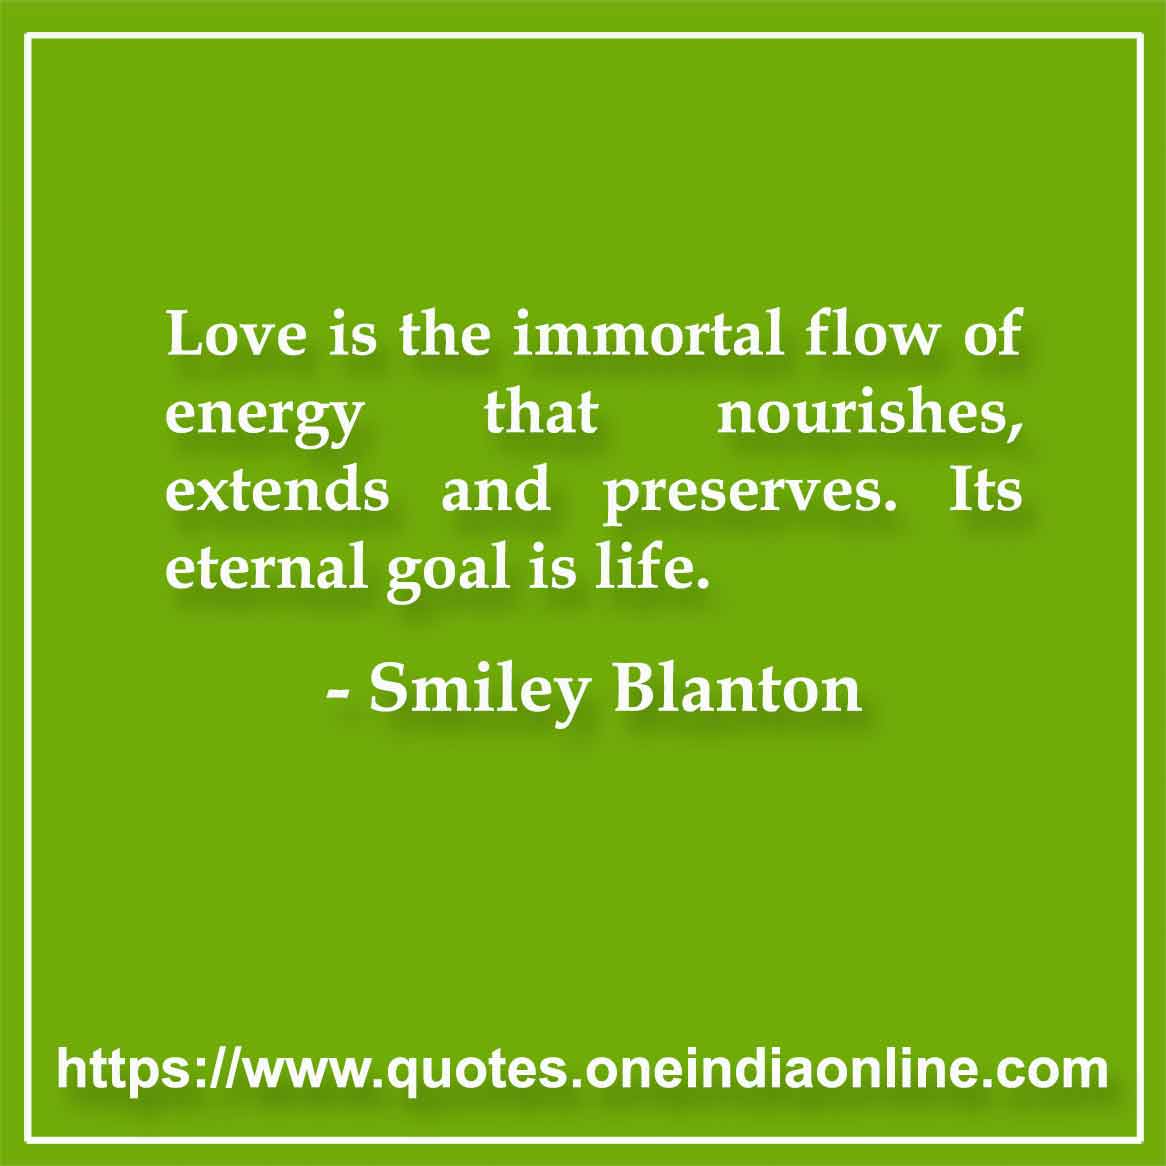 Love is the immortal flow of energy that nourishes, extends and preserves. Its eternal goal is life.

-  by Smiley Blanton